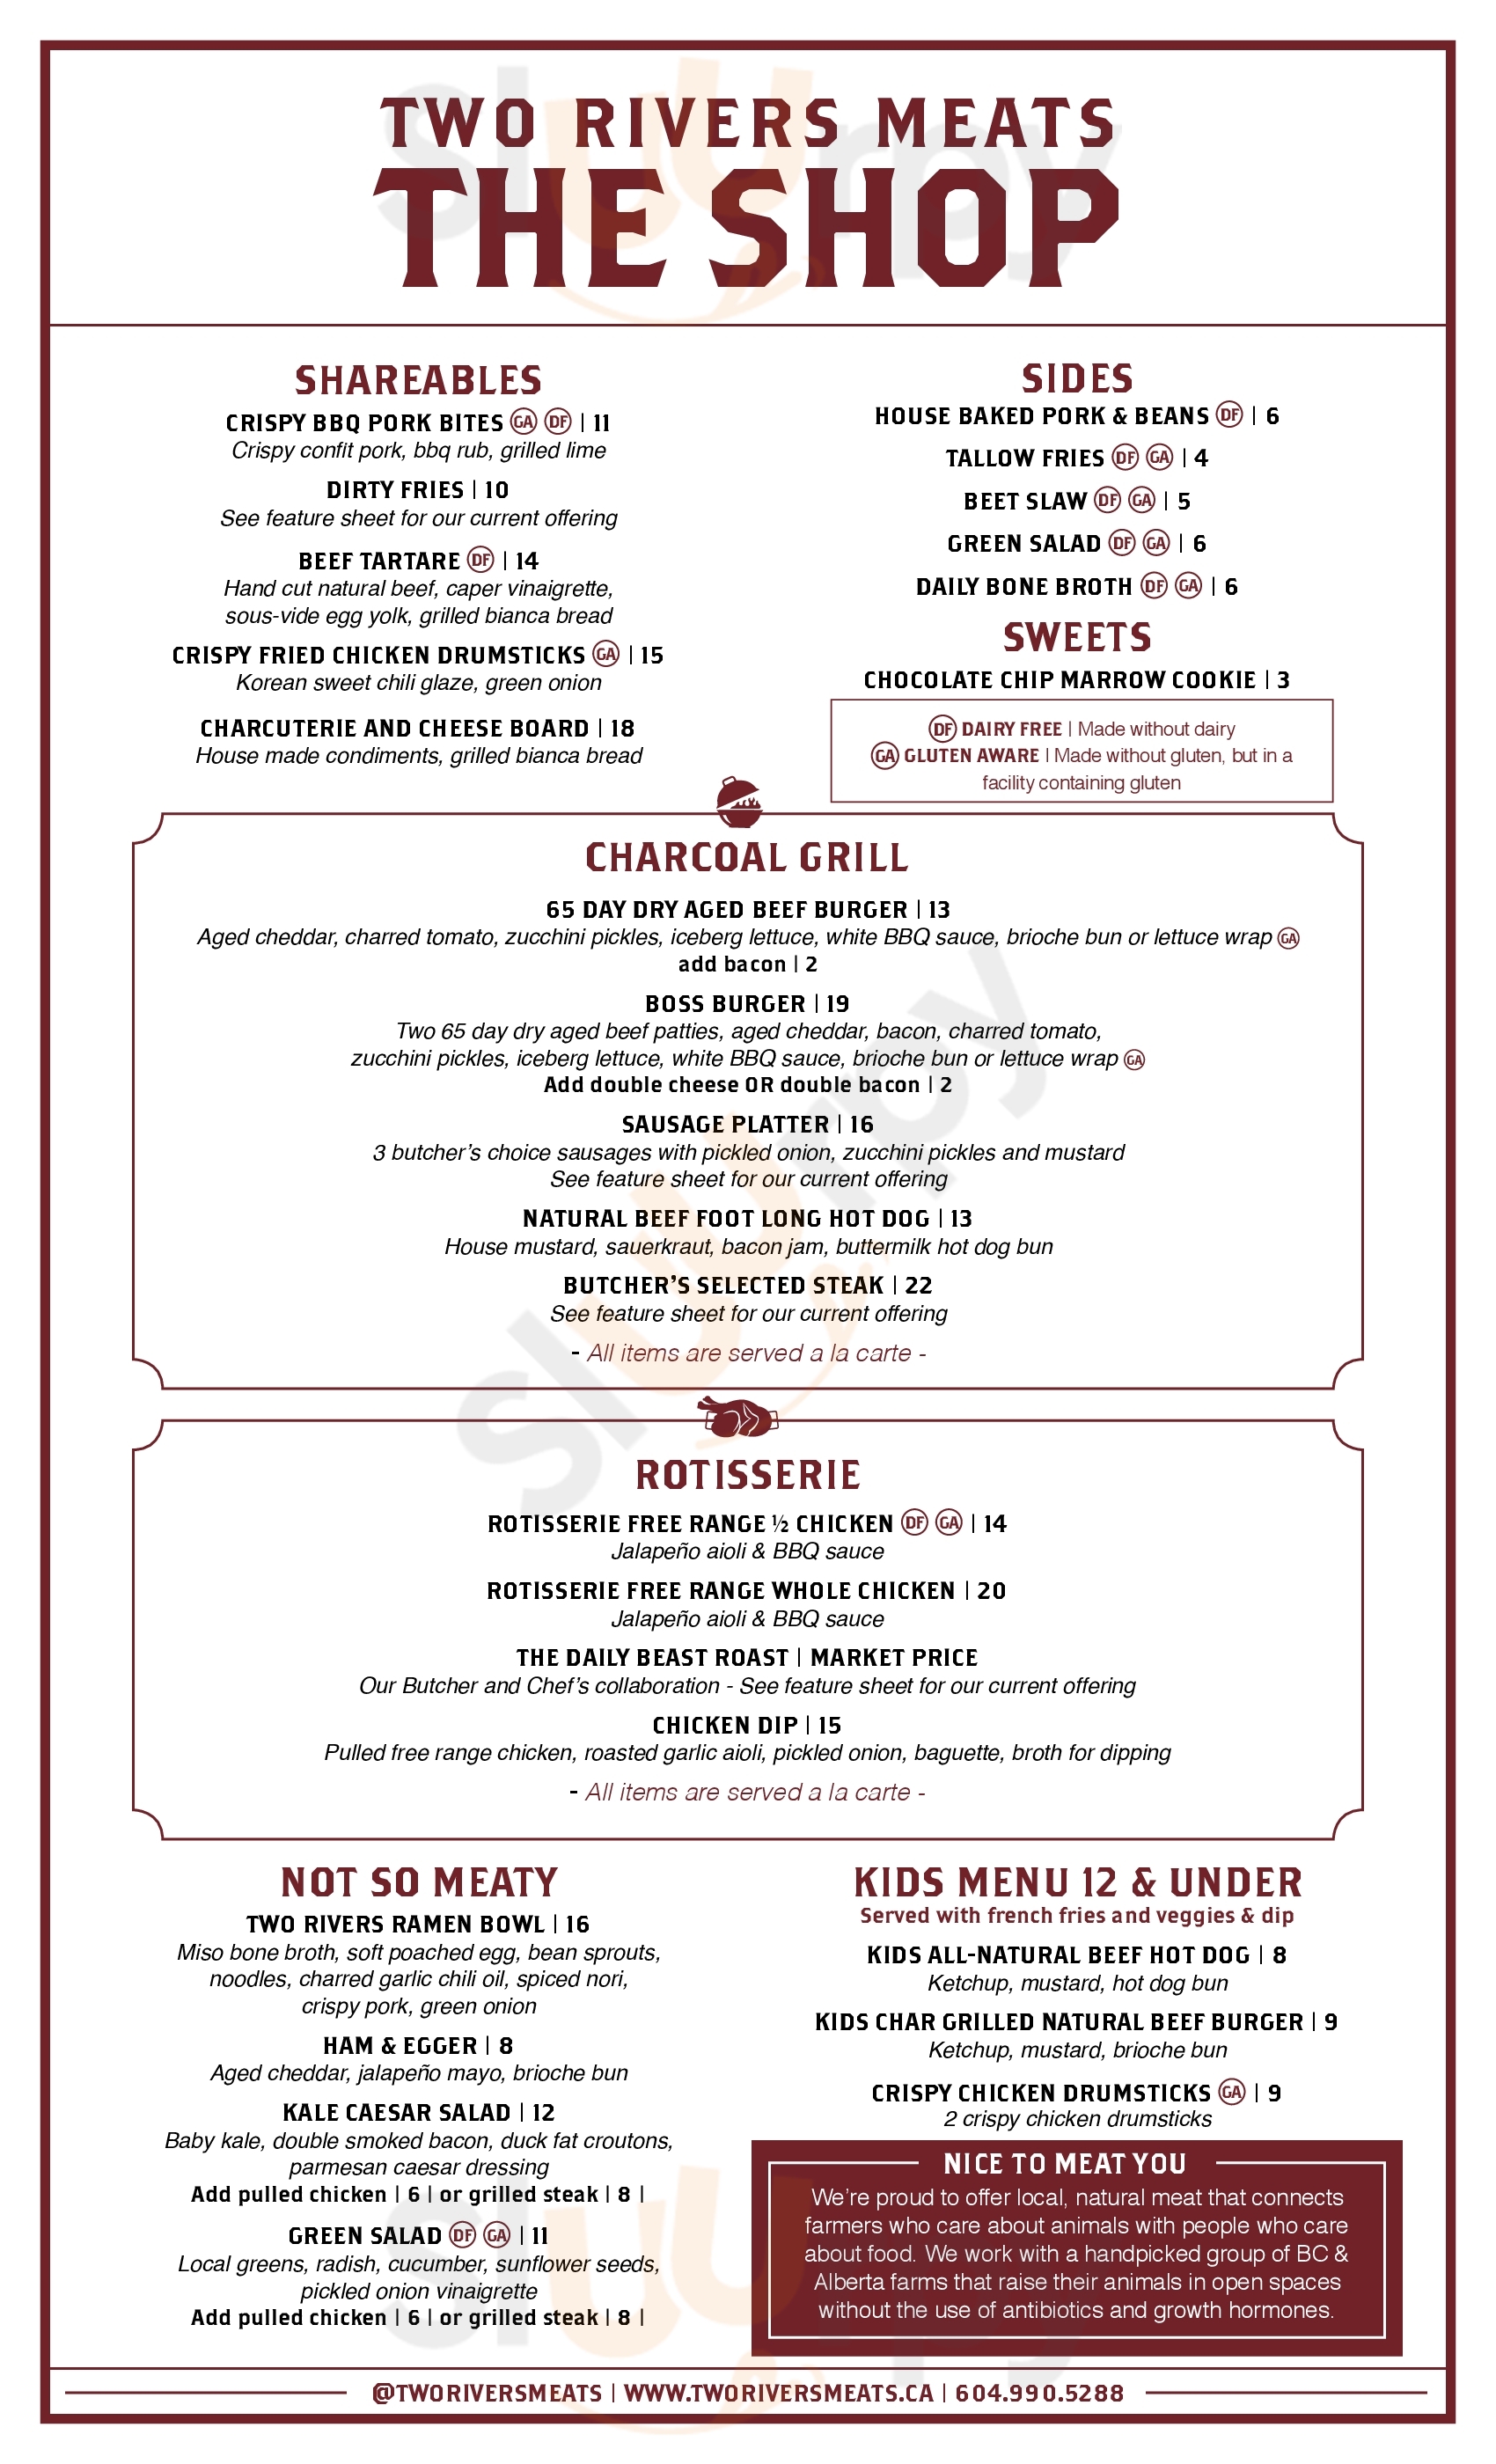 Two Rivers Specialty Meats North Vancouver Menu - 1